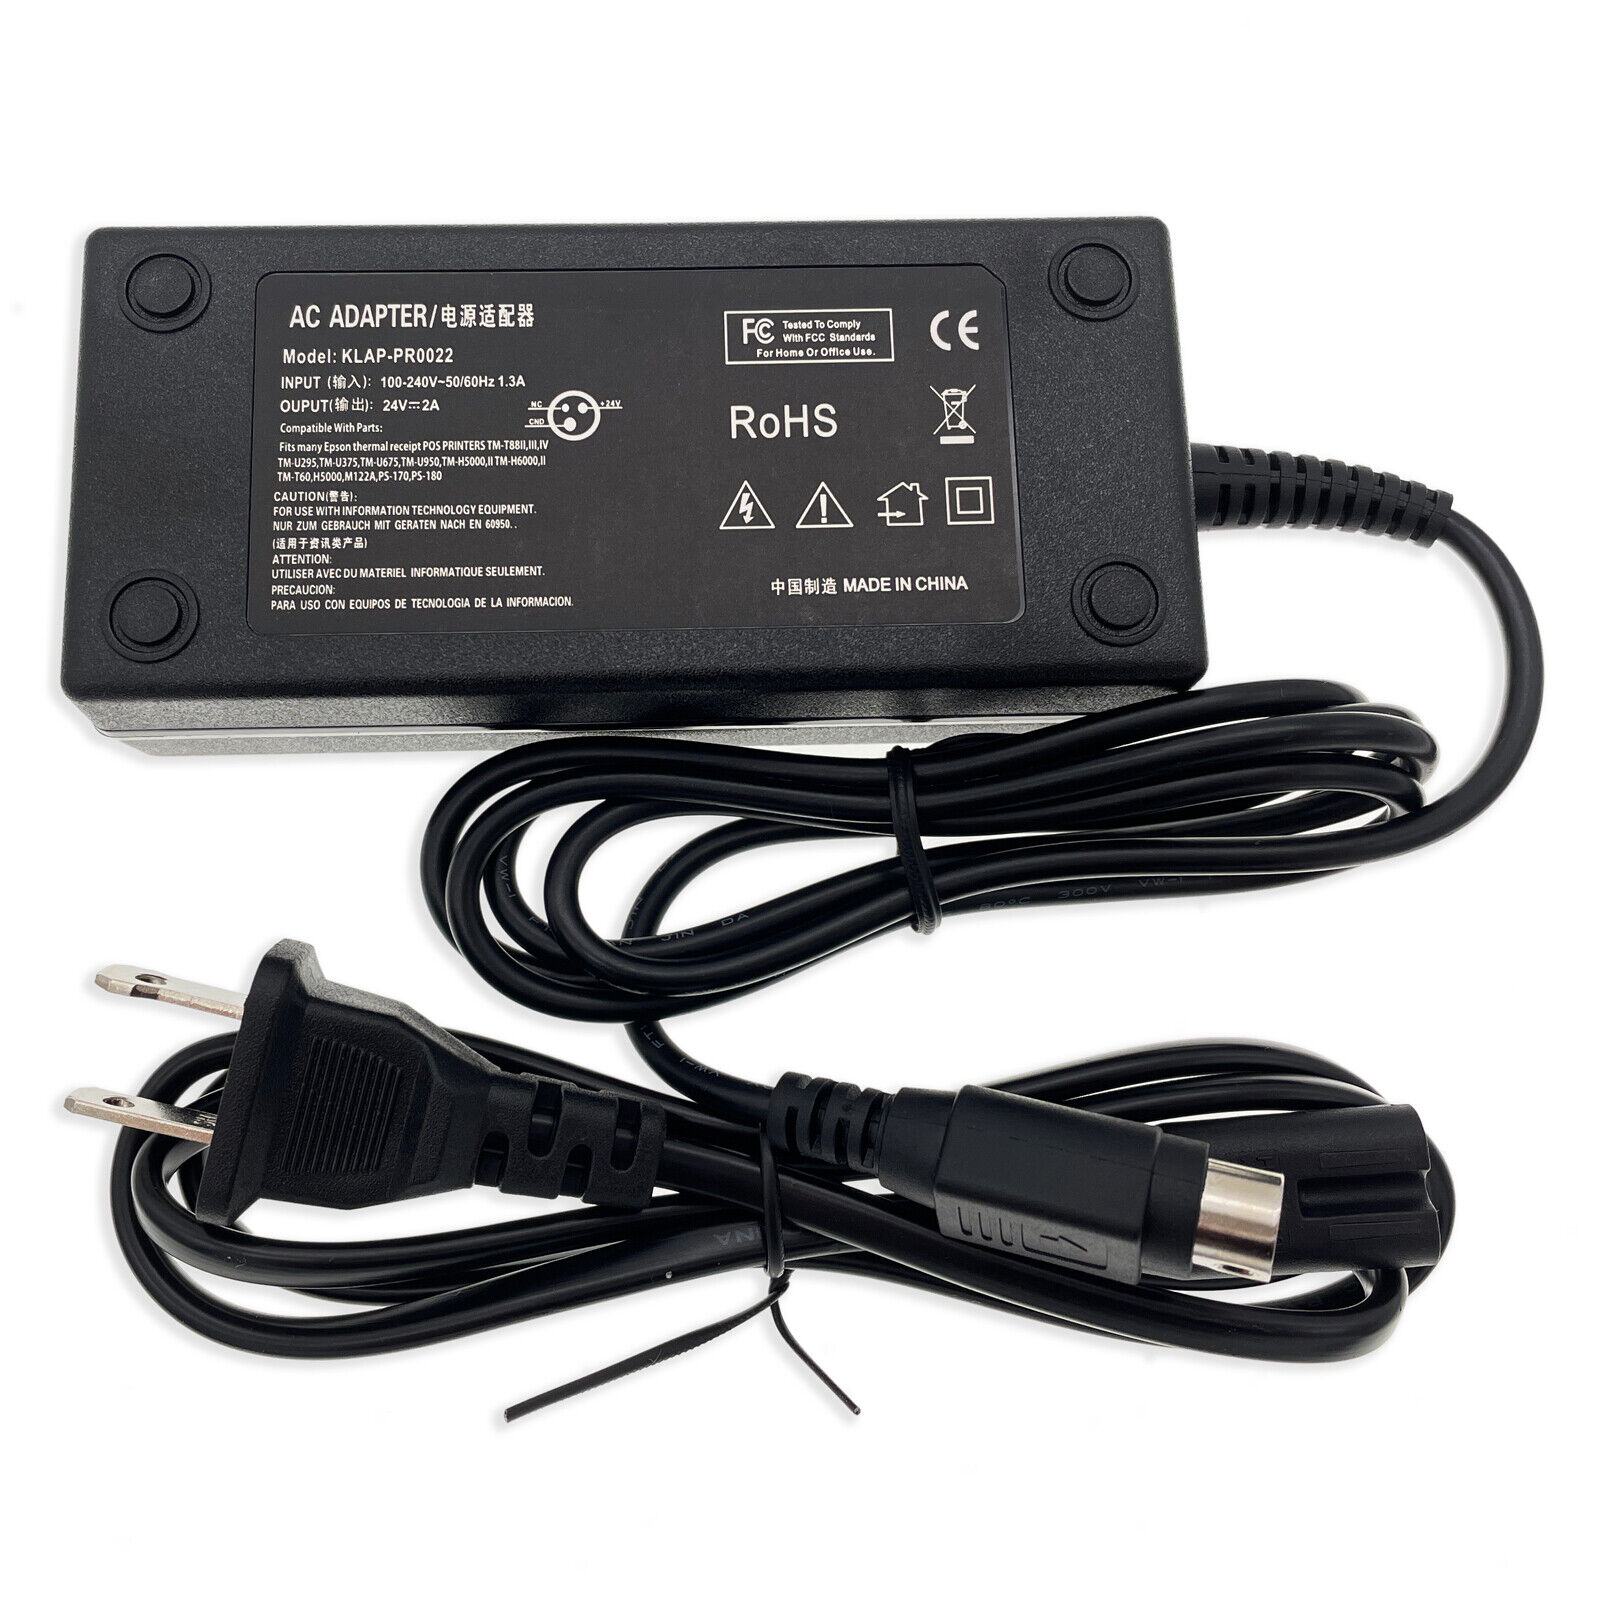 For Epson PS-180 AC Adapter Power Supply M159B M159A Printers C8255343 US